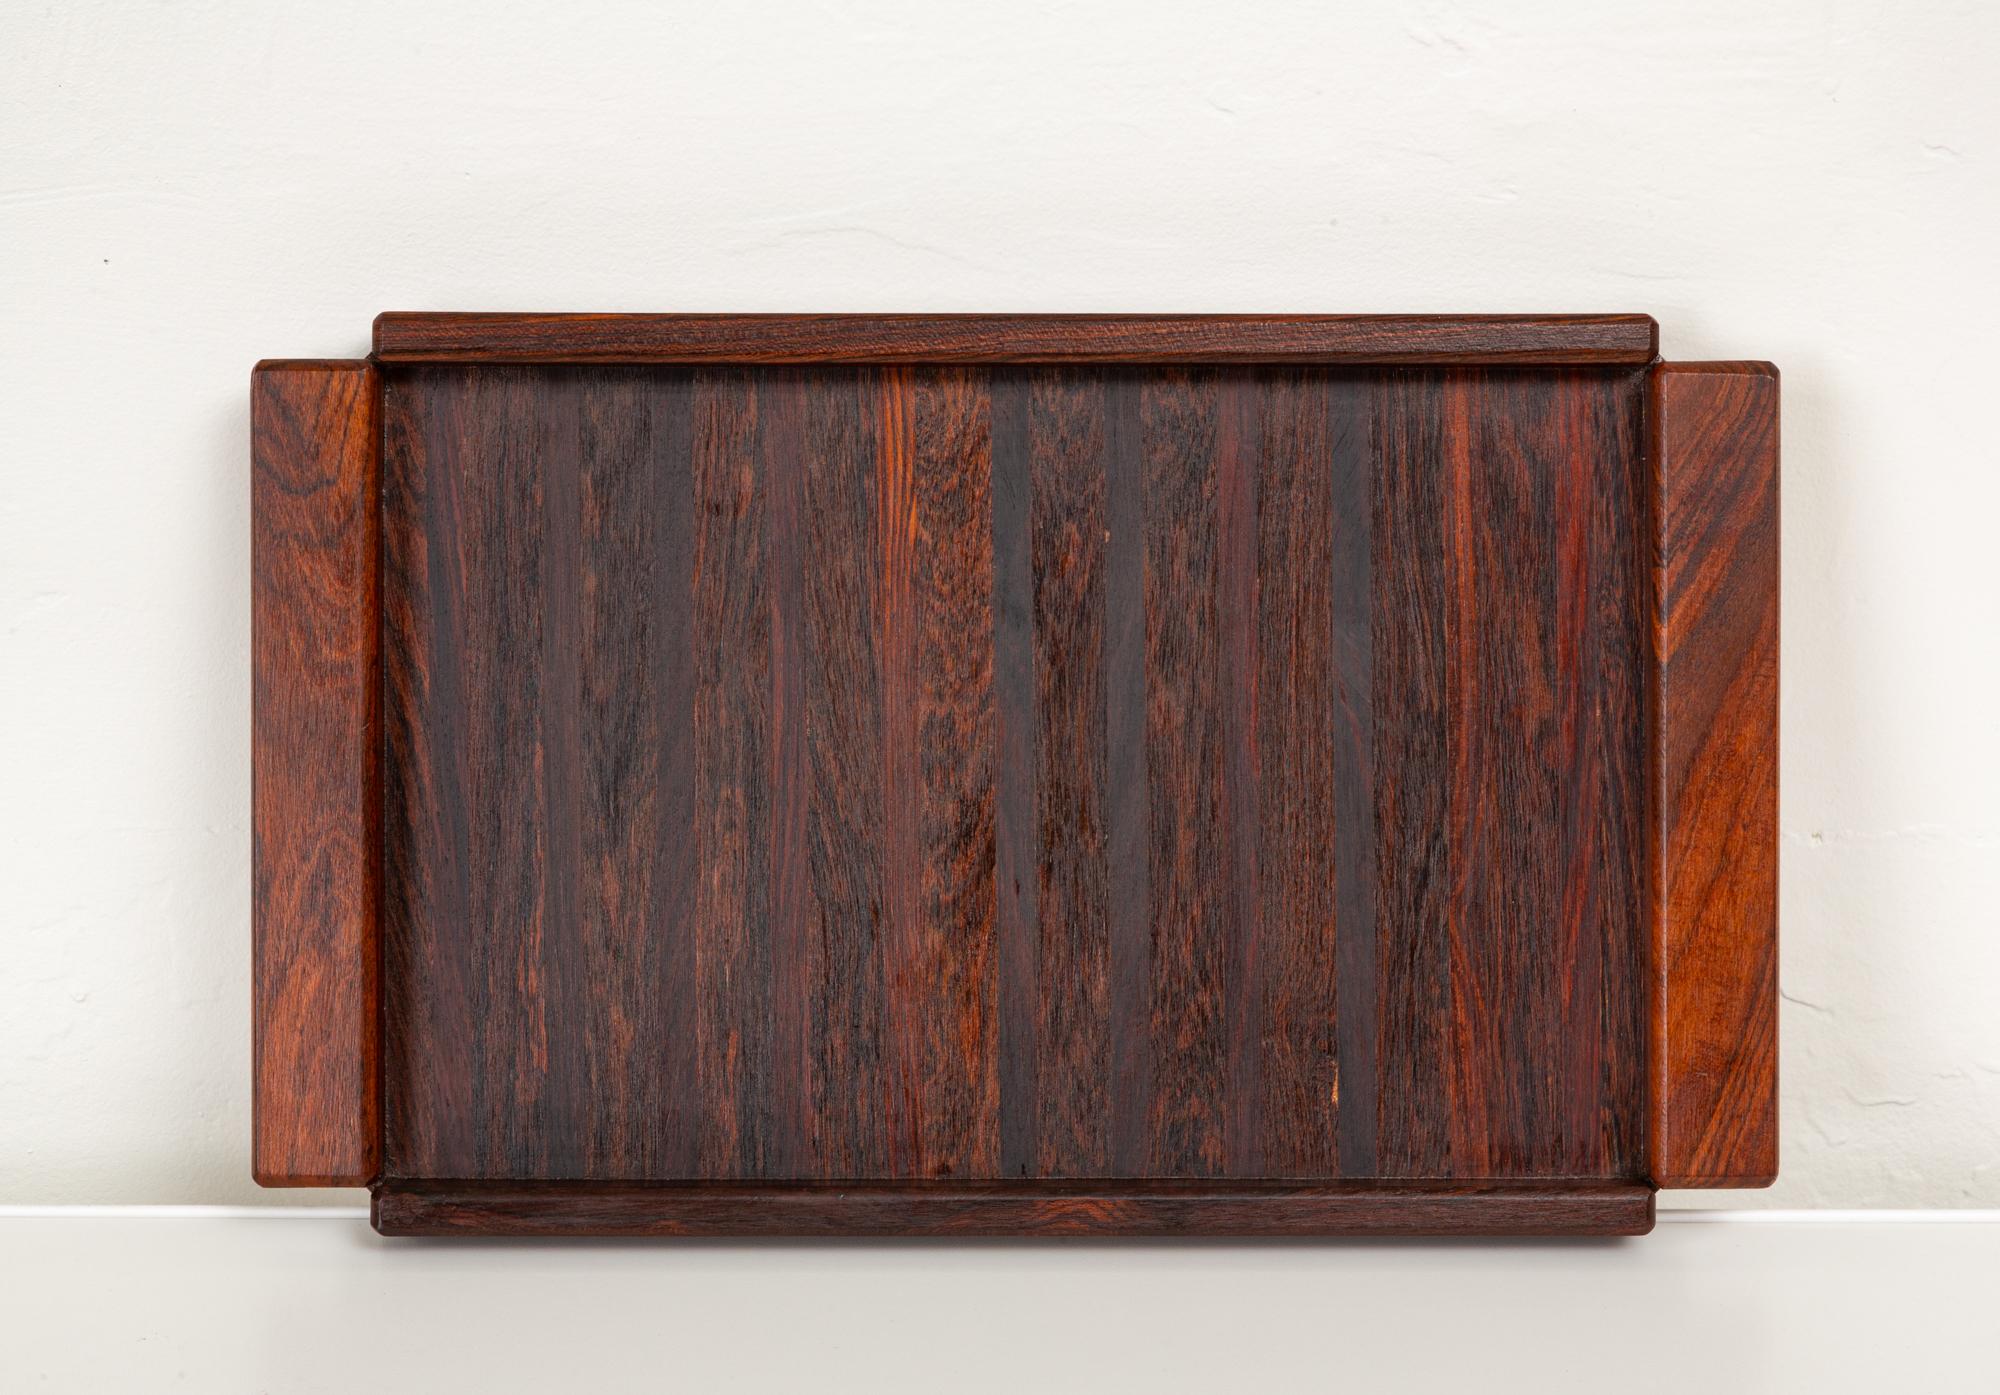 Rosewood tray by Don Shoemaker for Señal, Mexico, circa 1960s. The tray has a rosewood frame with integrated handles and features an inlaid striped pattern of highly figured rosewood.

Retains original manufacturer’s label on the